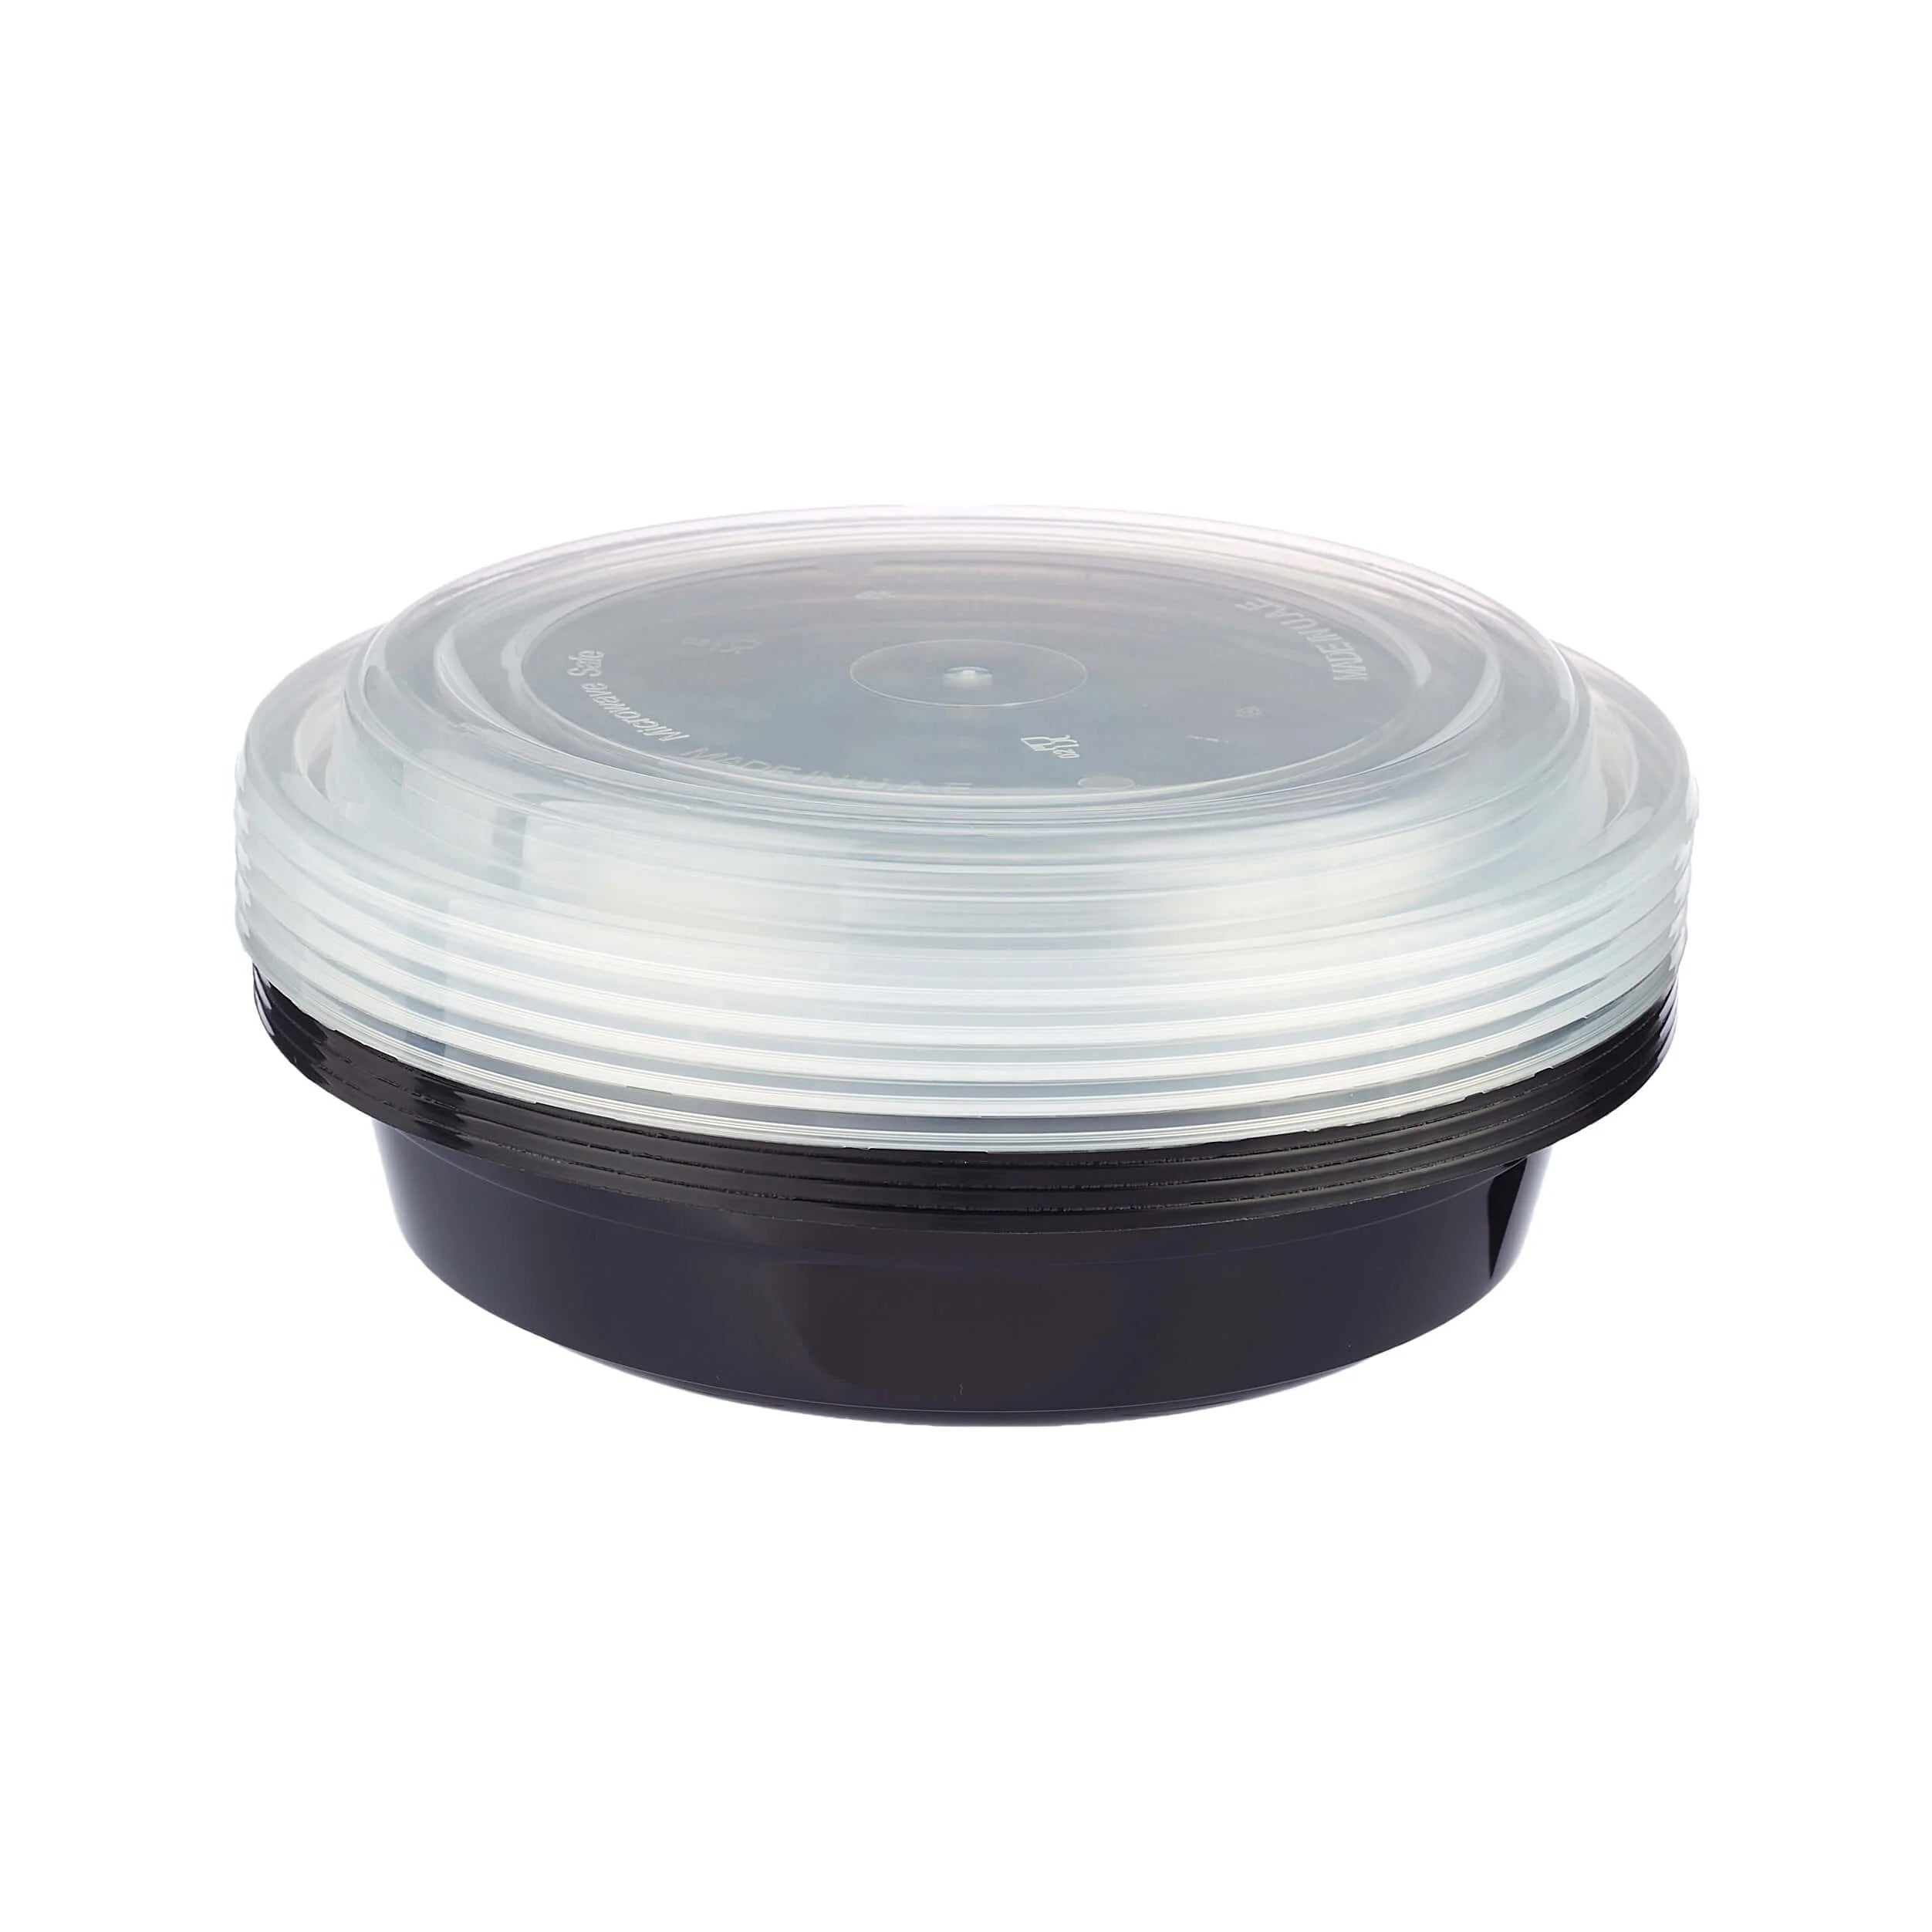 300 Pieces Black Base Round Container 32OZ + LID-150*185*50 mm